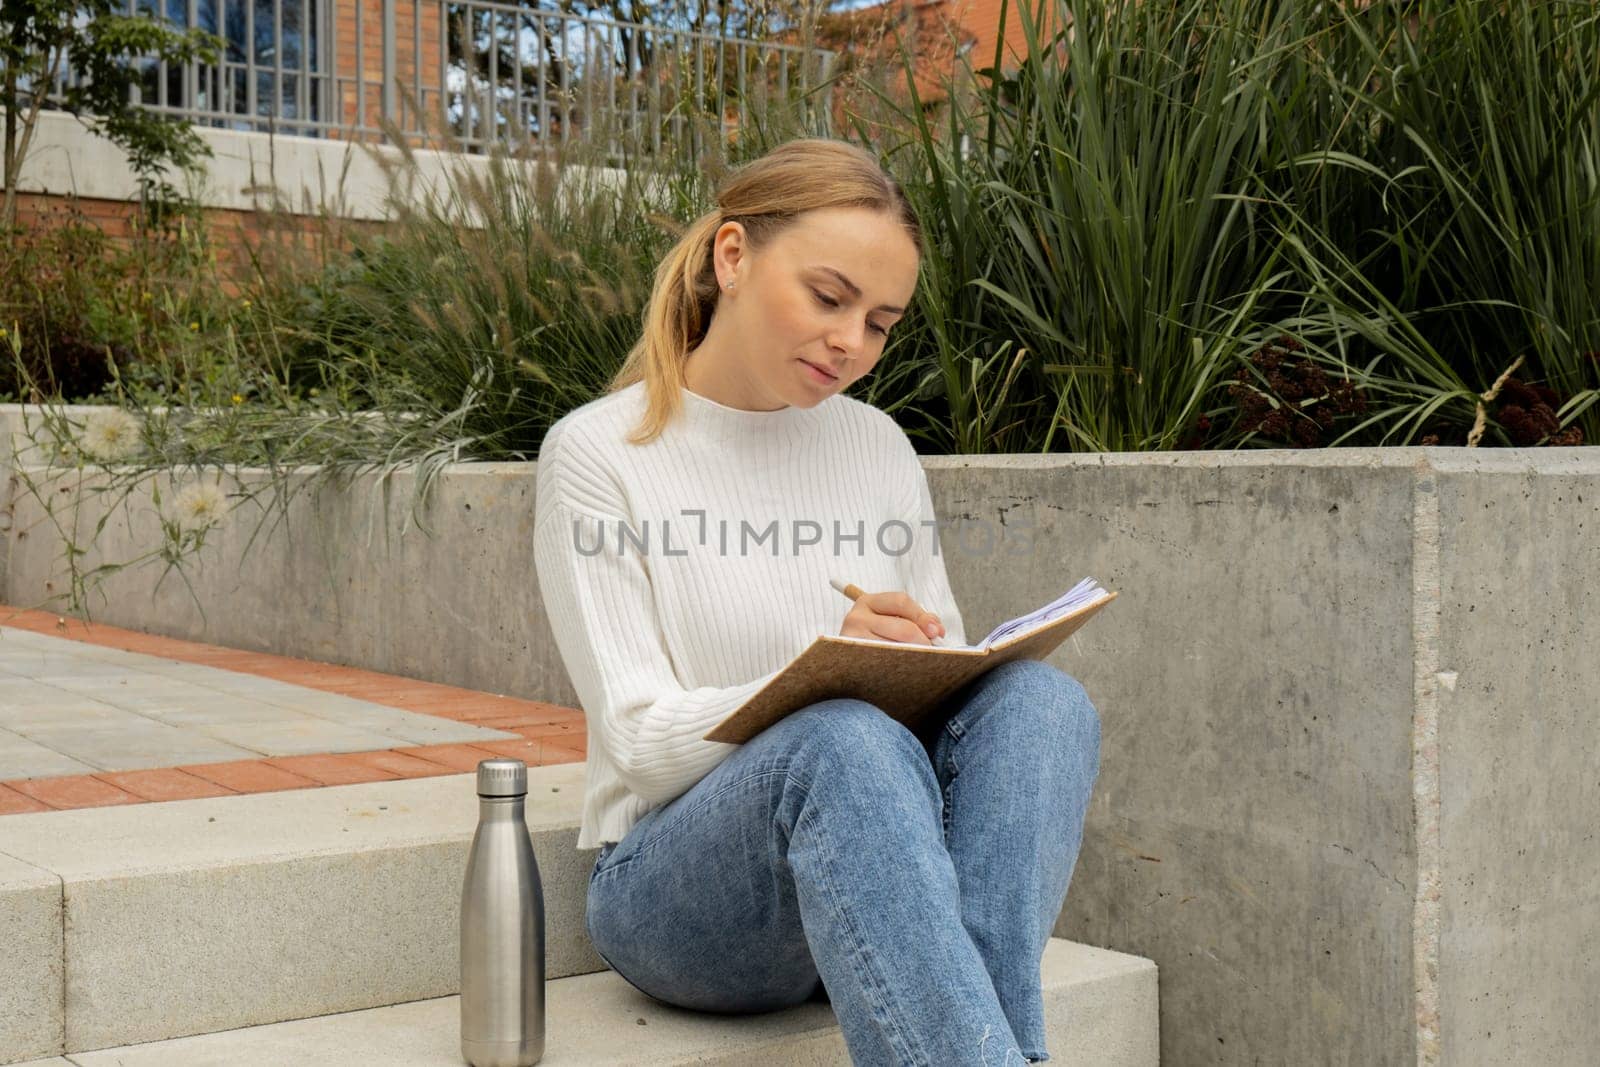 Young student study with notebook in park. Drinking water, hot tea or coffee from reusable metal bottle. Writing gratitude journal self reflection self discovery by anna_stasiia